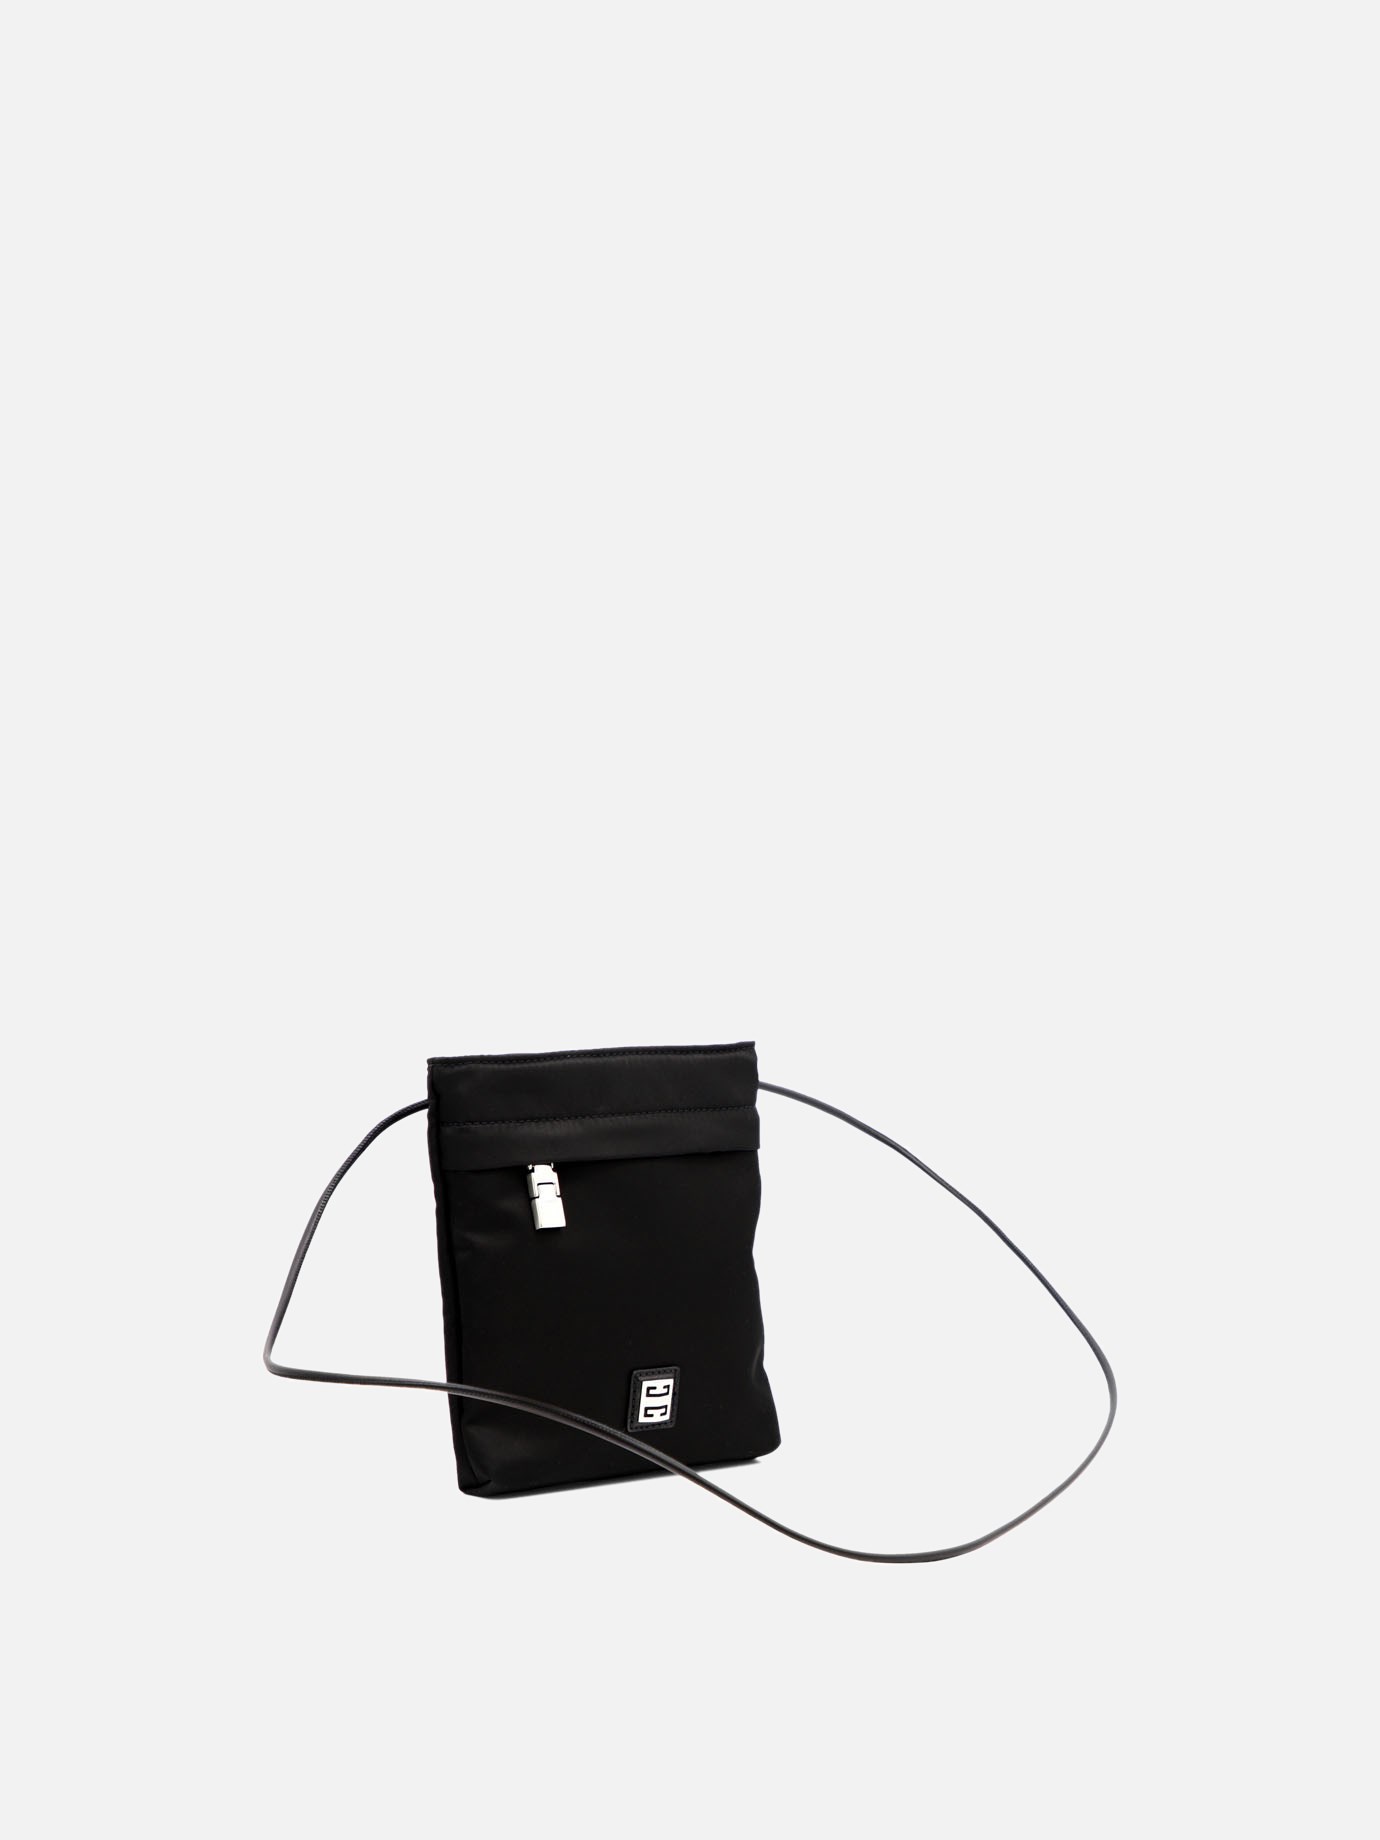  4G  crossbody bag by Givenchy